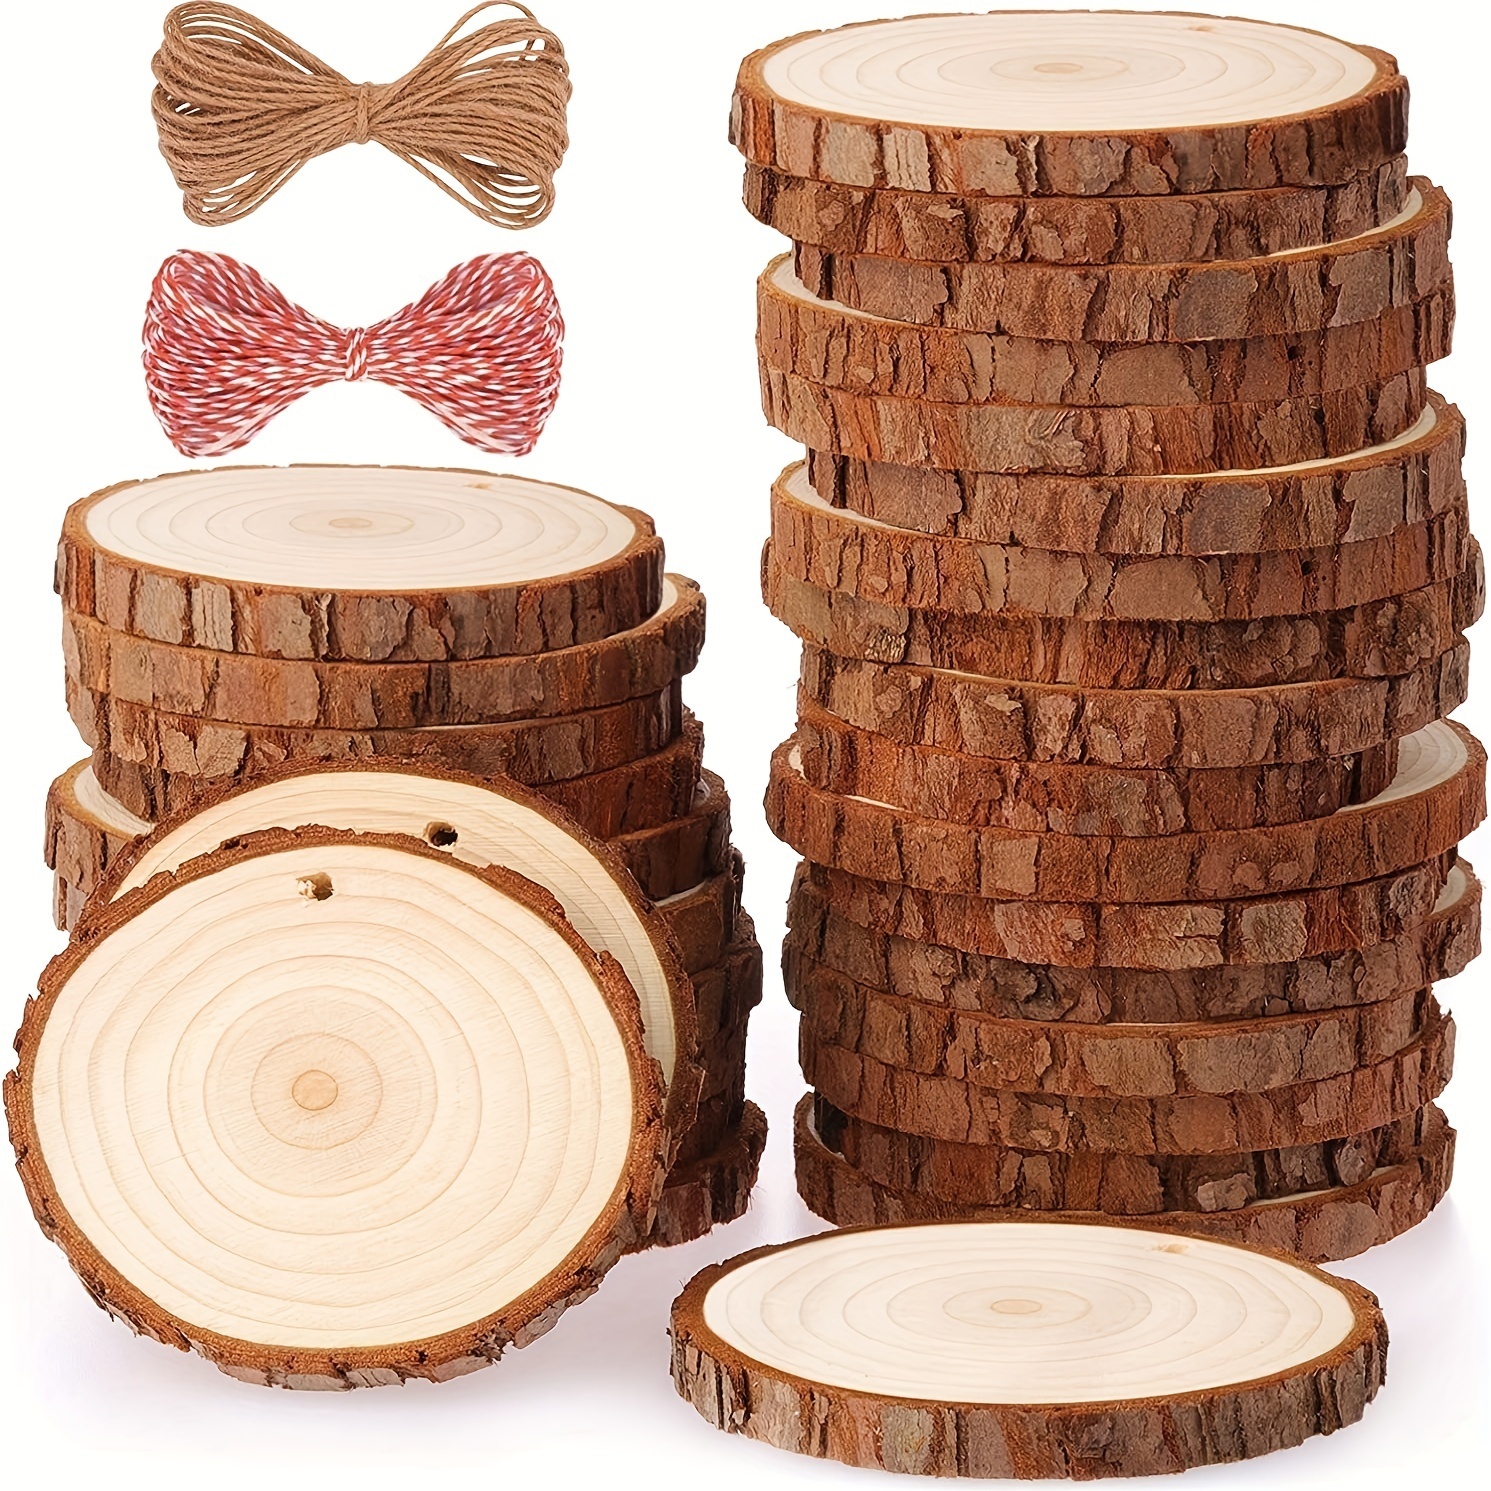  [Upgraded] 5 Pieces 1/4 Thick 14 Inch Round Wood Circles,  Unfinished Round Wooden Discs Wood Rounds Plaque Circle Wood Boards Cutouts  for Door Hangers Crafts, Coasters, Pyrography, Painting : Arts